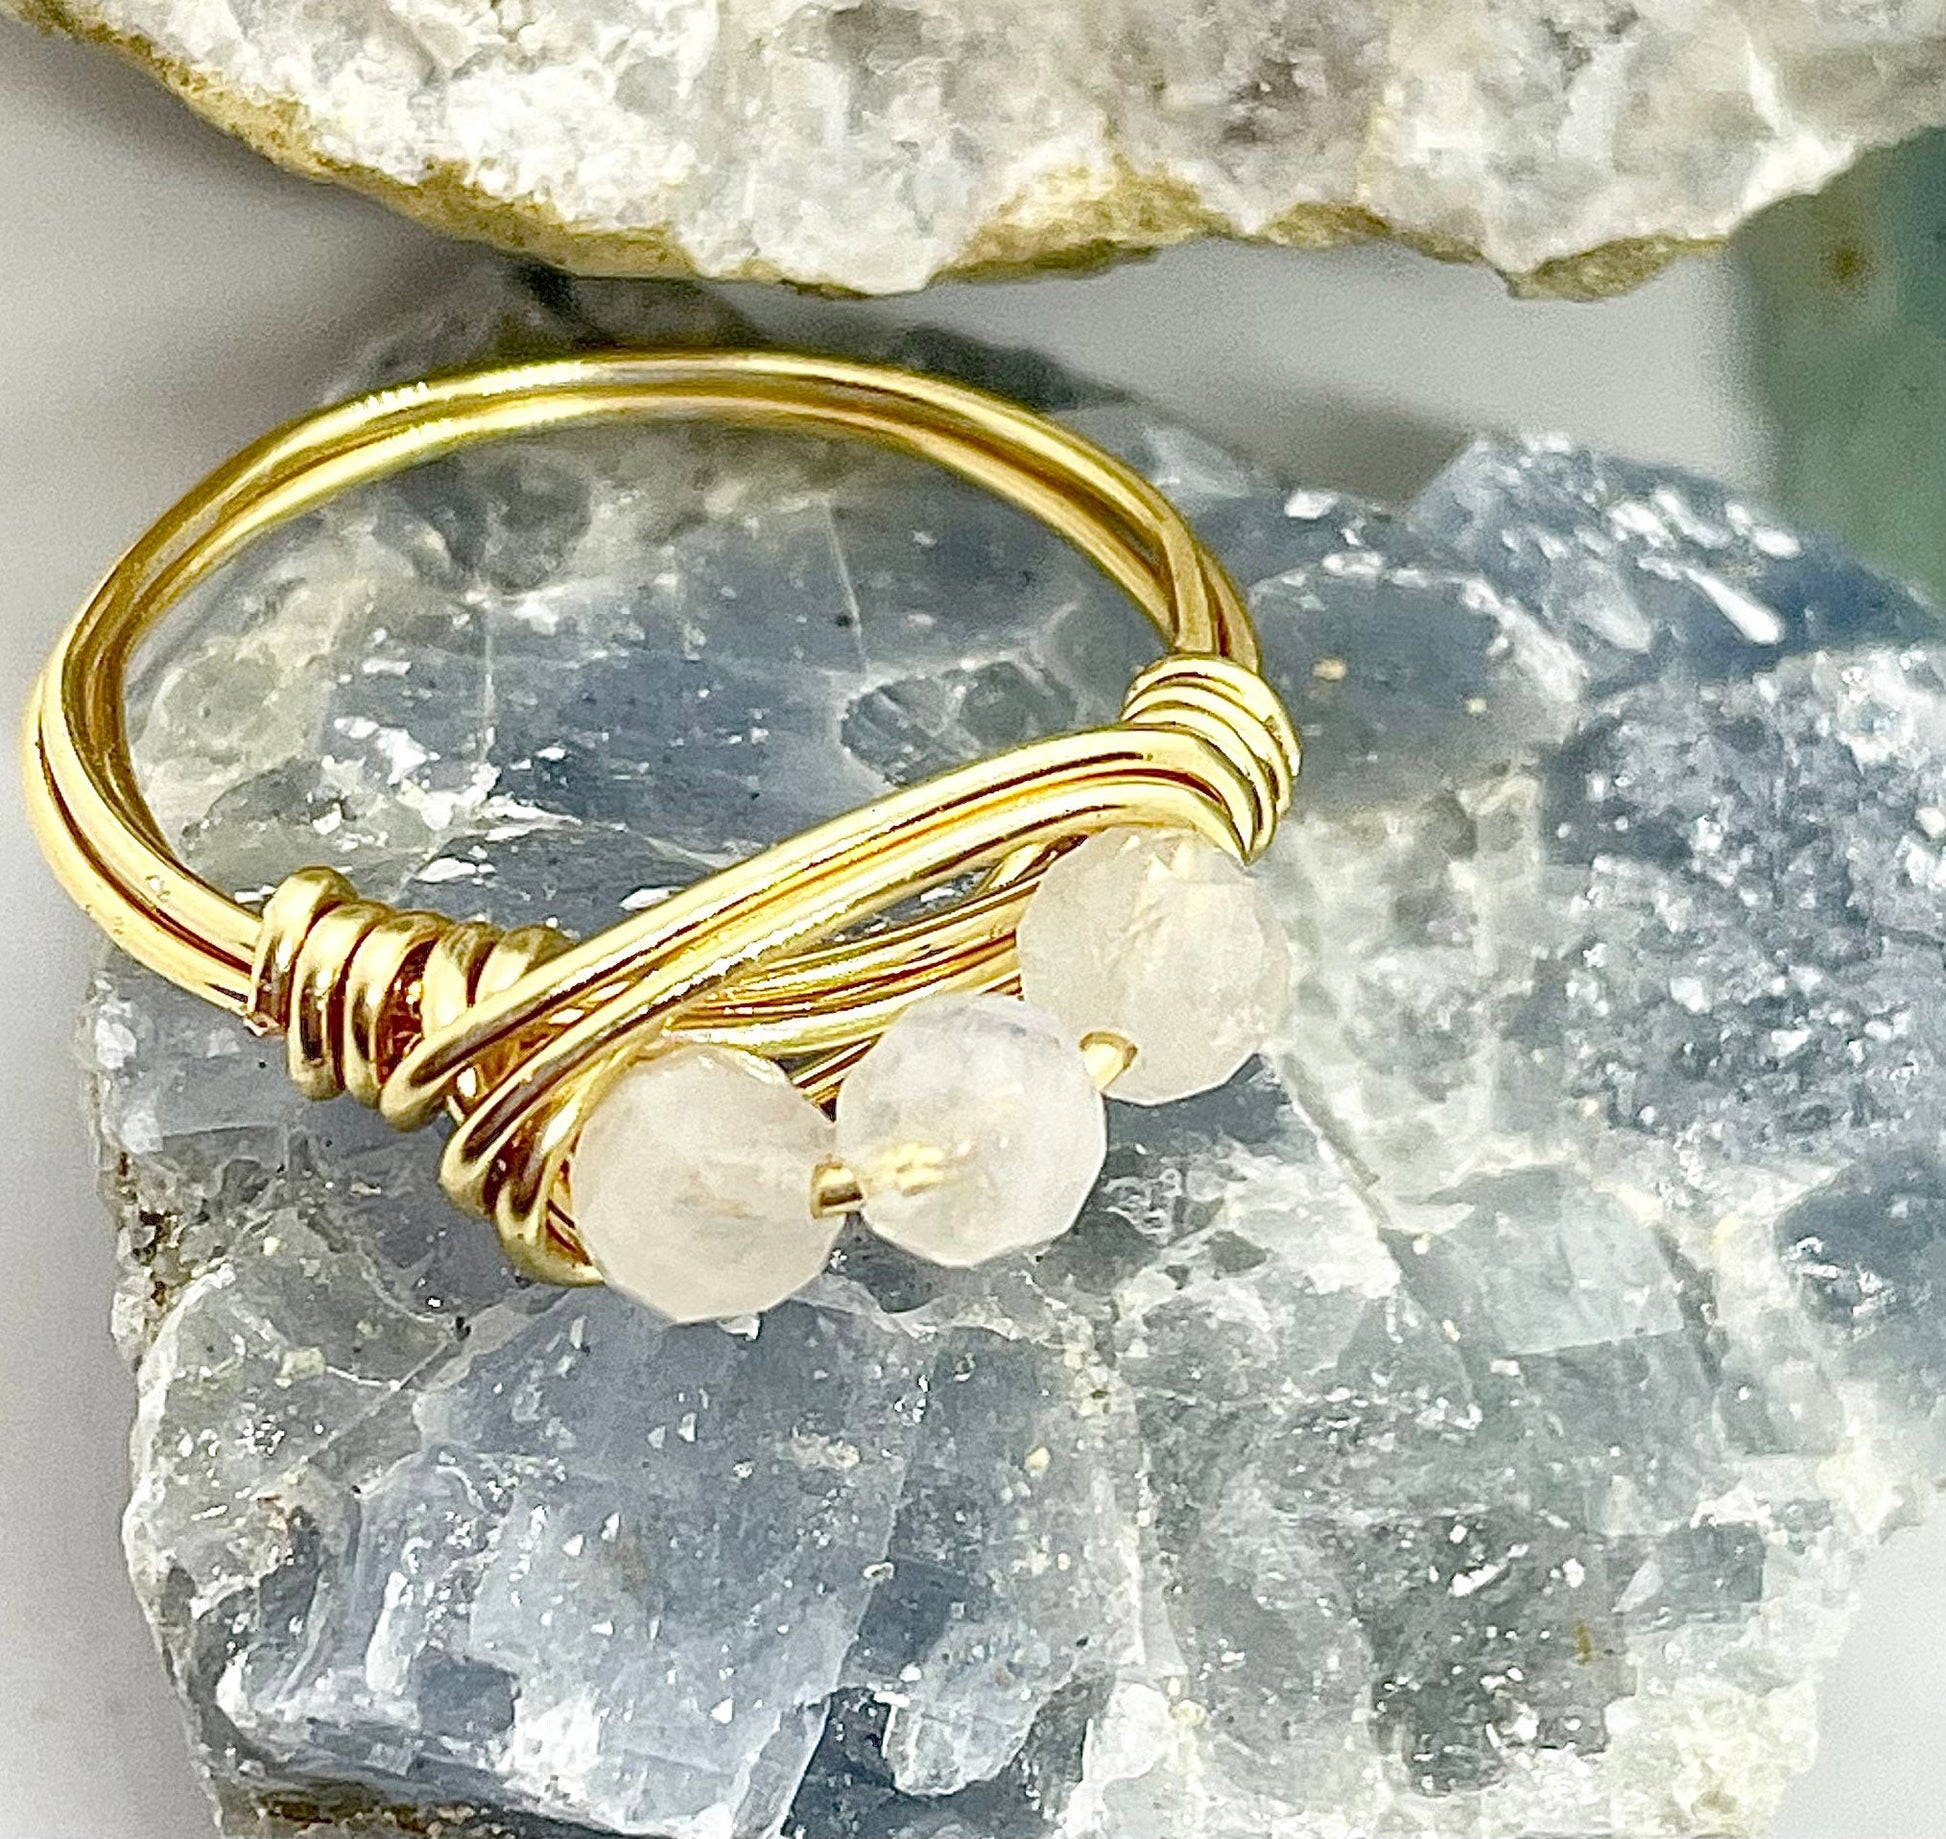 Moonstone Ring, Wire Wrapped Ring With Moonstone, Moonstone Jewelry, Preppy Jewelry, Fairycore Aesthetic Rings, Gold Plated Trendy Rings